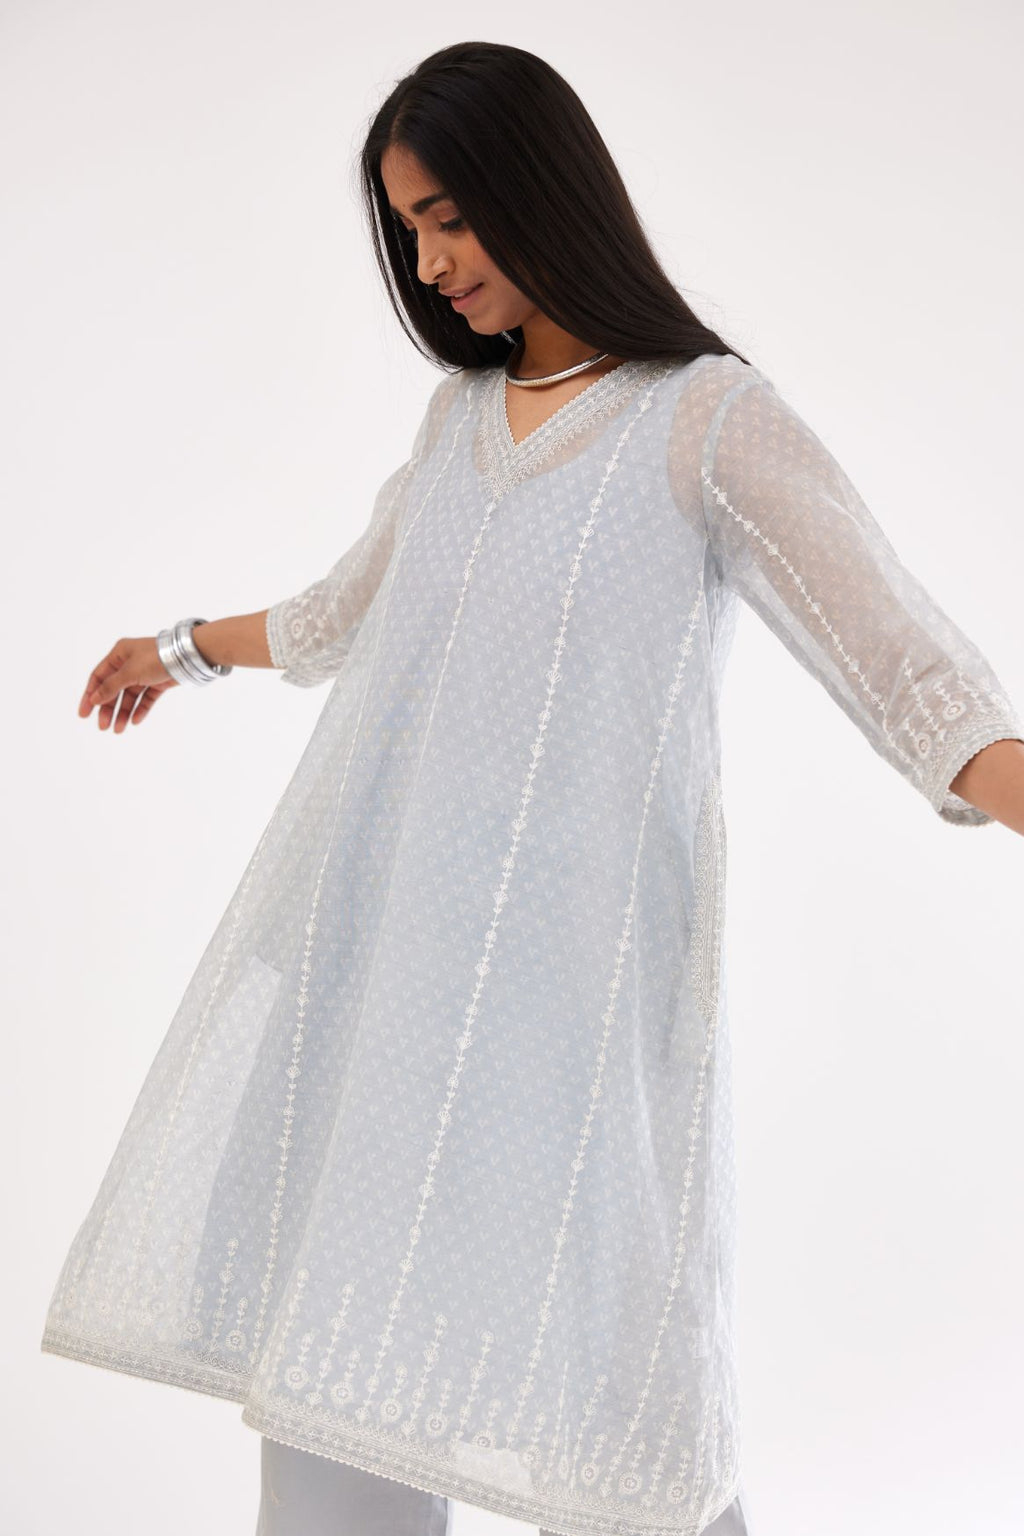 Blue hand block printed cotton chanderi A-line short kurta set with all over delicate dori and silk thread embroidery stripes.